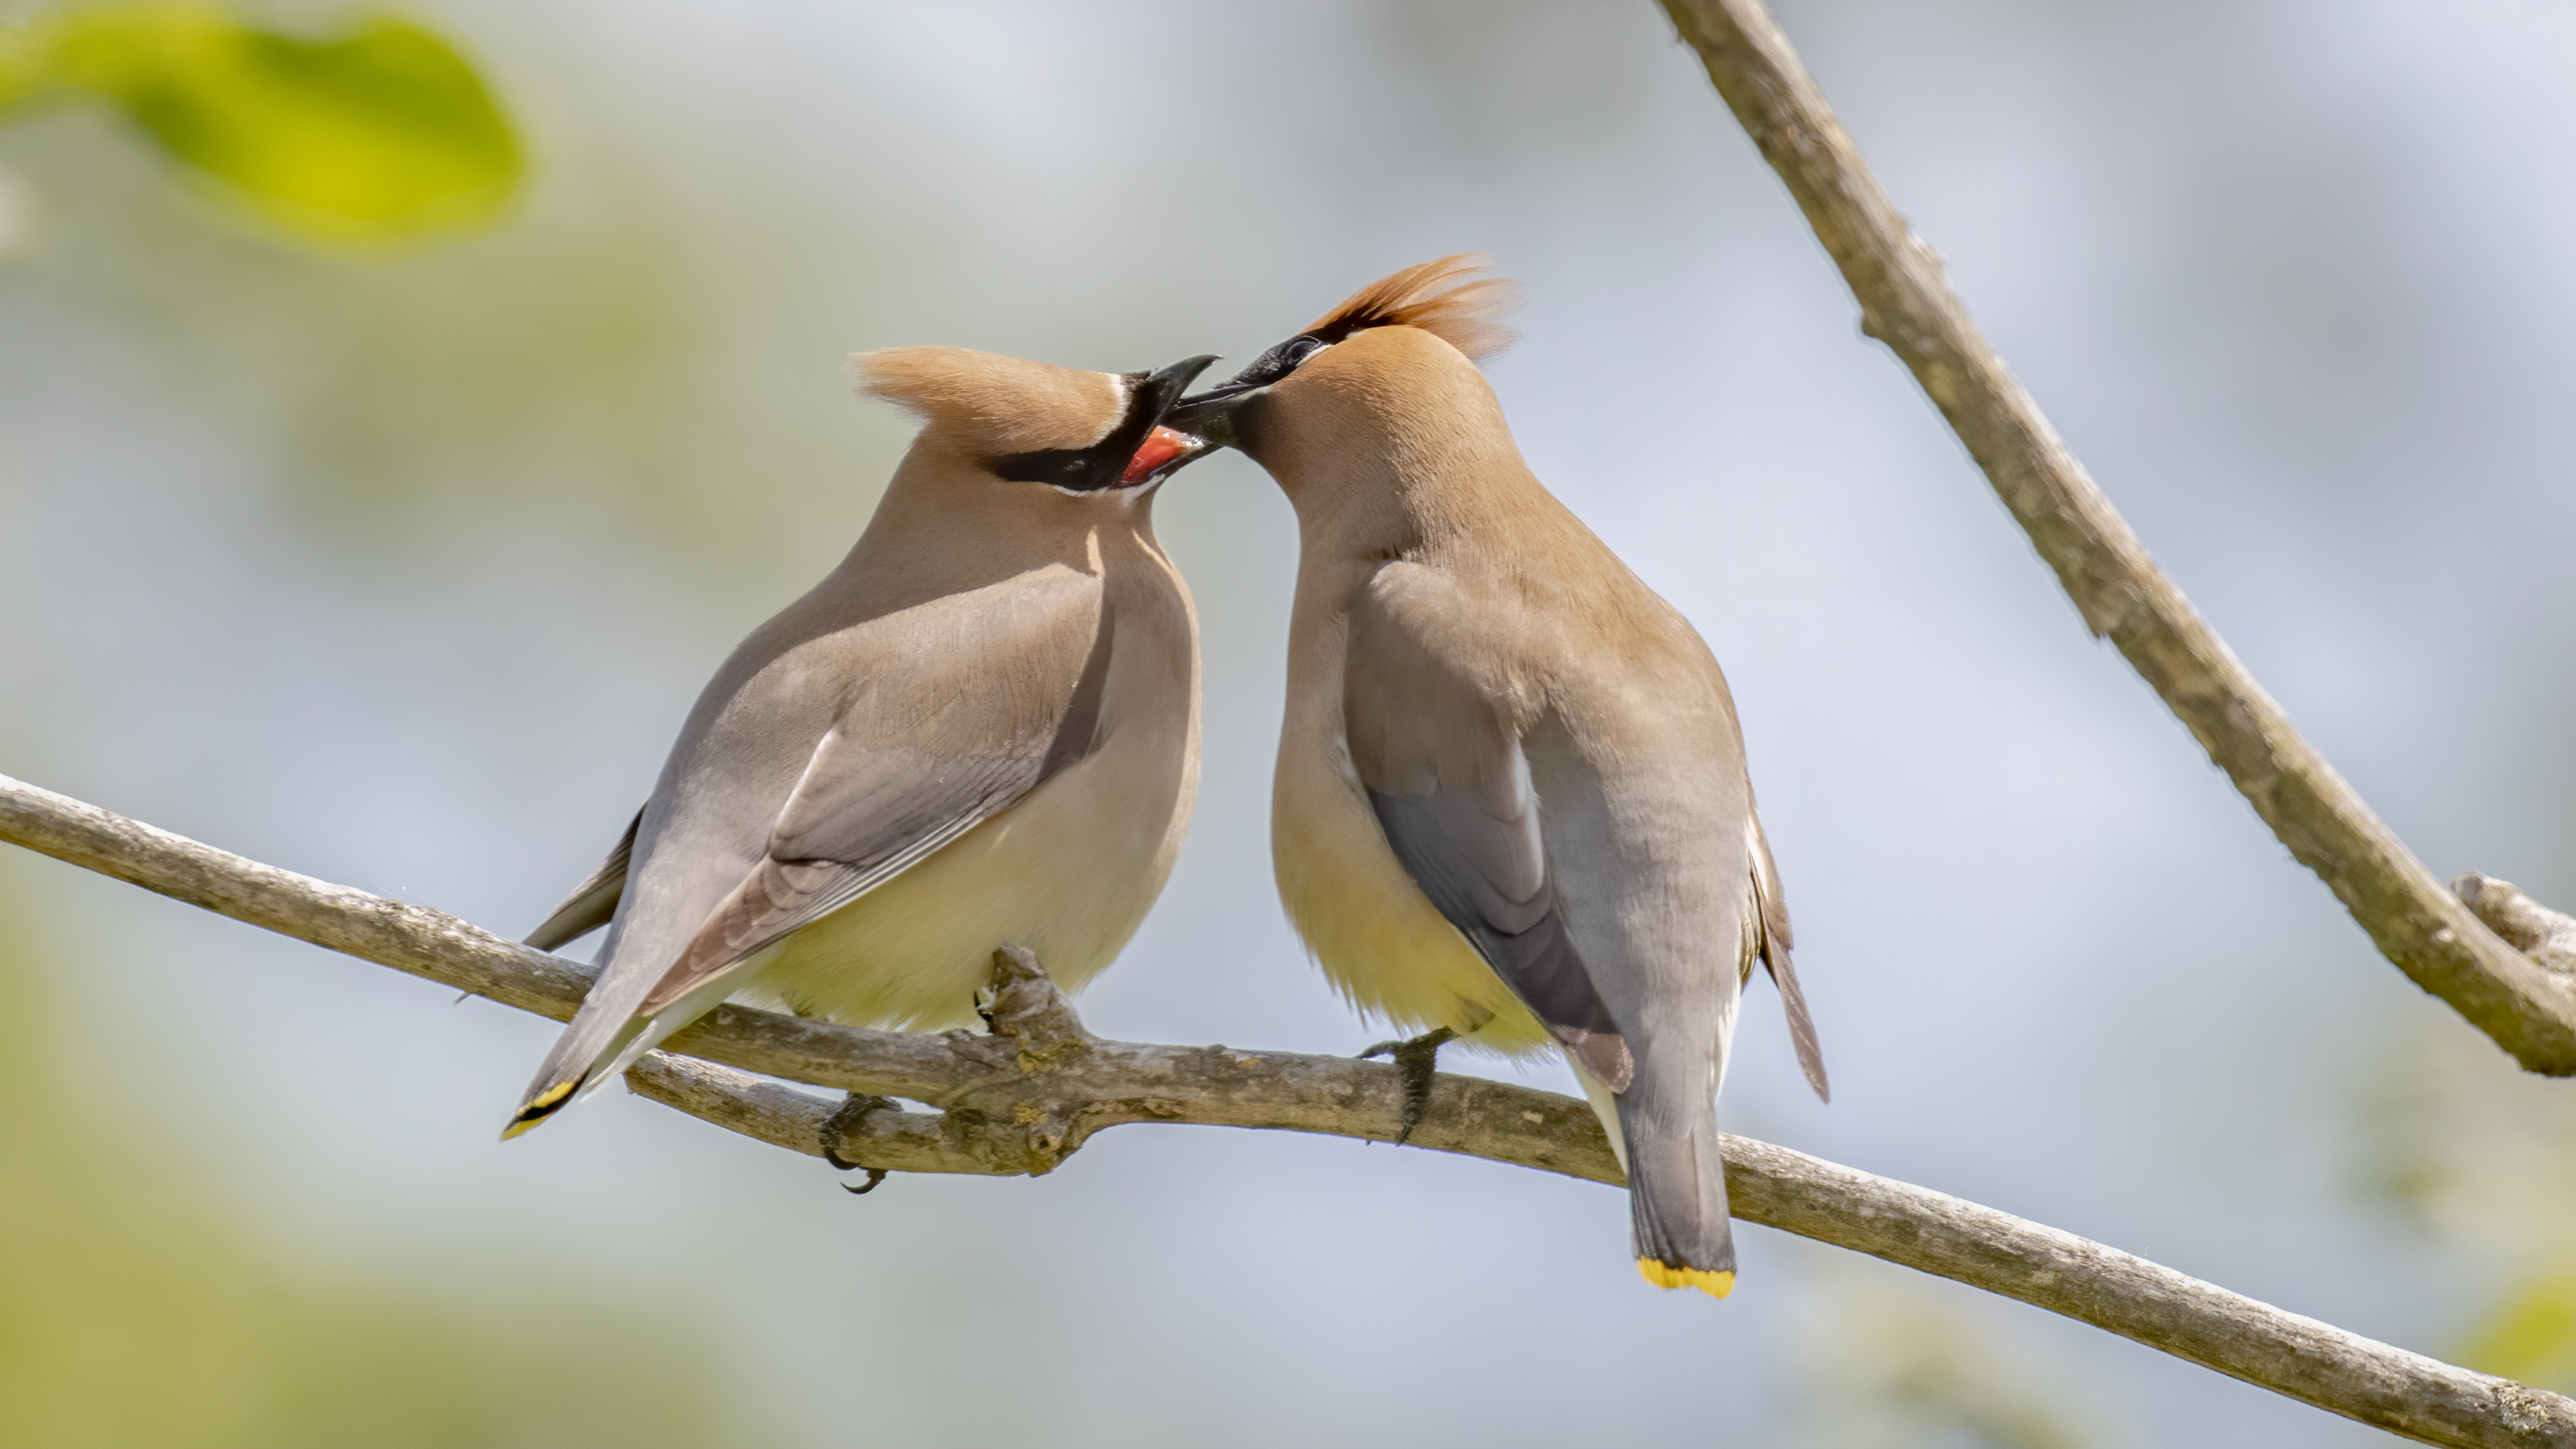 Cedar Waxwings breed across New York City, though they often go unnoticed. <a href="https://www.flickr.com/photos/ericellingson/49958016288" target="_blank" >Photo</a>: Eric Ellingson/<a href="https://creativecommons.org/licenses/by-nc-nd/2.0/" target="_blank" >CC BY-NC-ND 2.0</a>